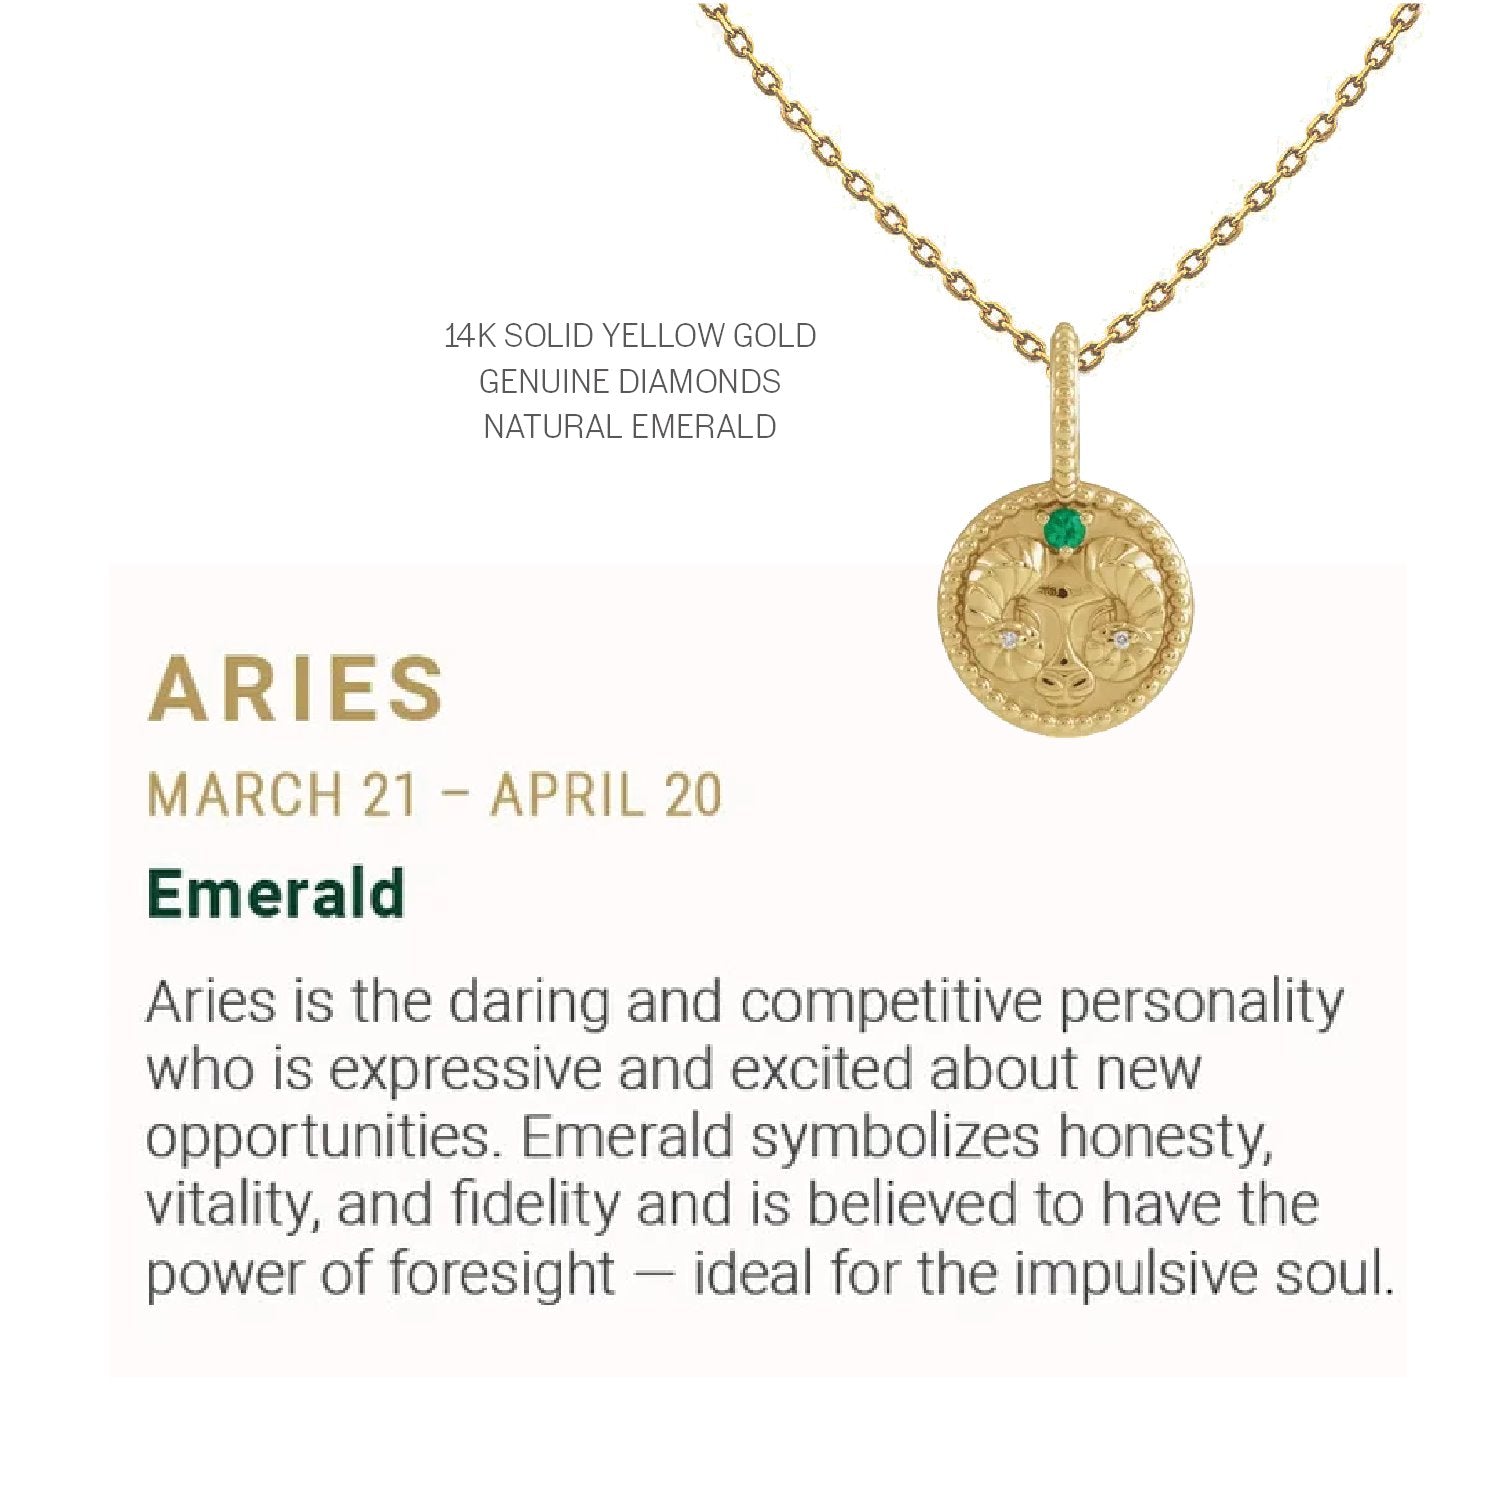 Zodiac Charm Necklace in 14K Gold with Diamonds Necklace Robyn Canady 14K Solid Gold 16" Aries